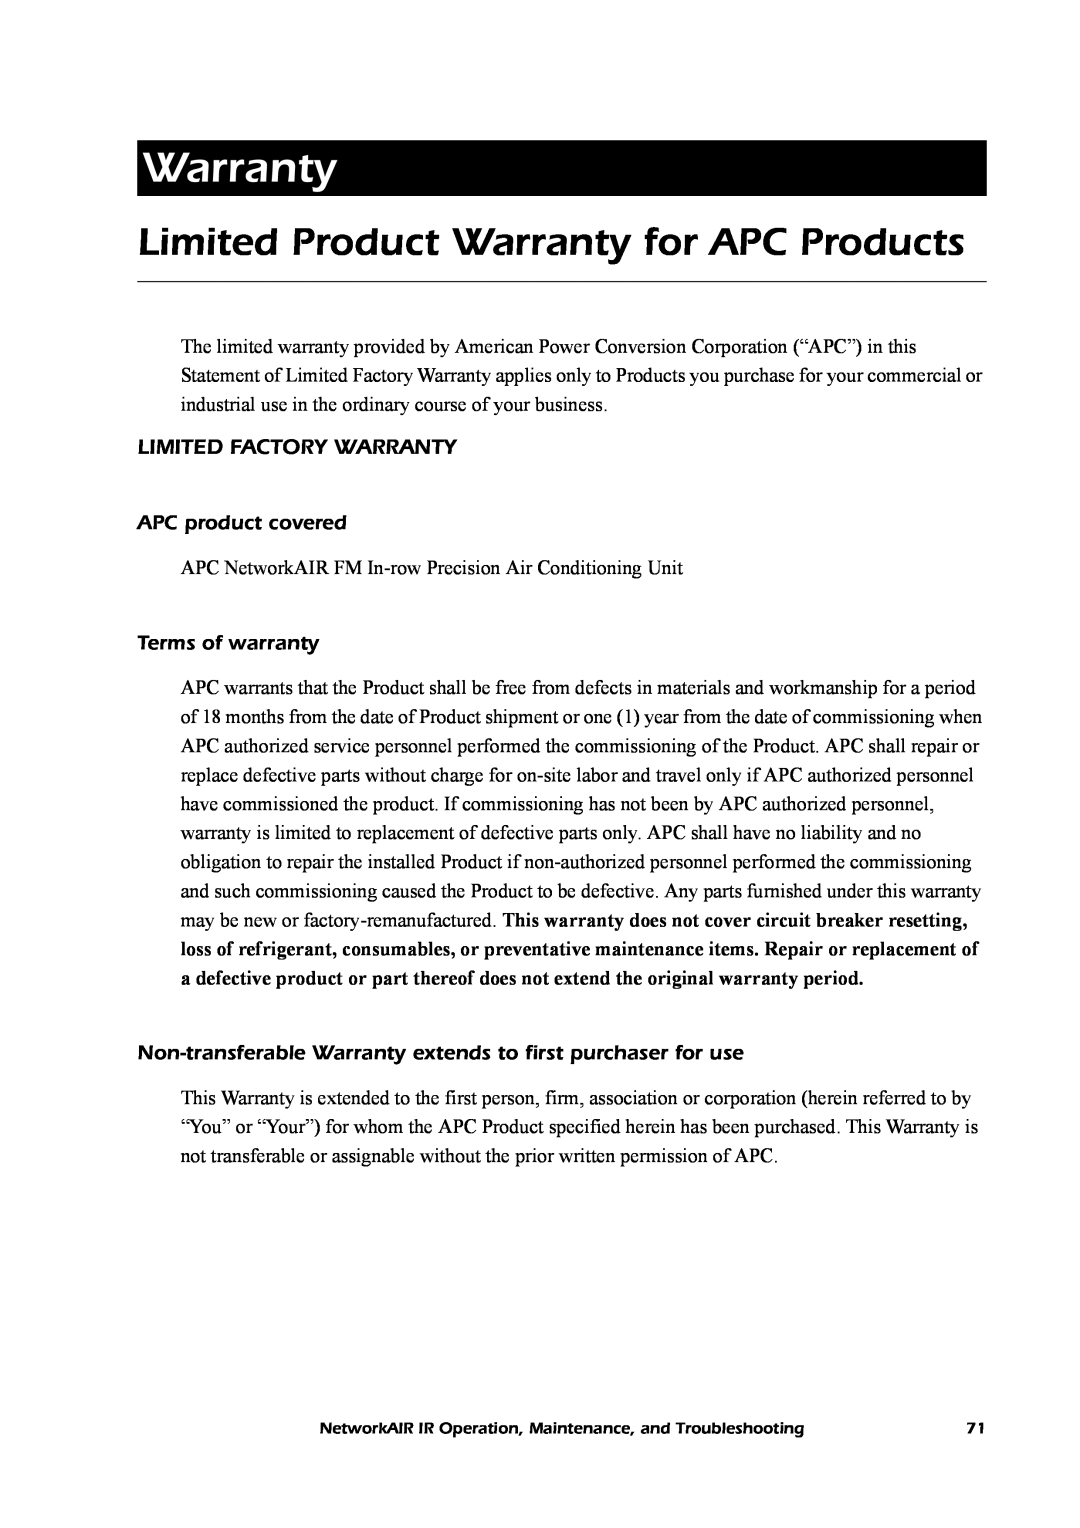 American Power Conversion Central Air Conditioning System manual Limited Product Warranty for APC Products 